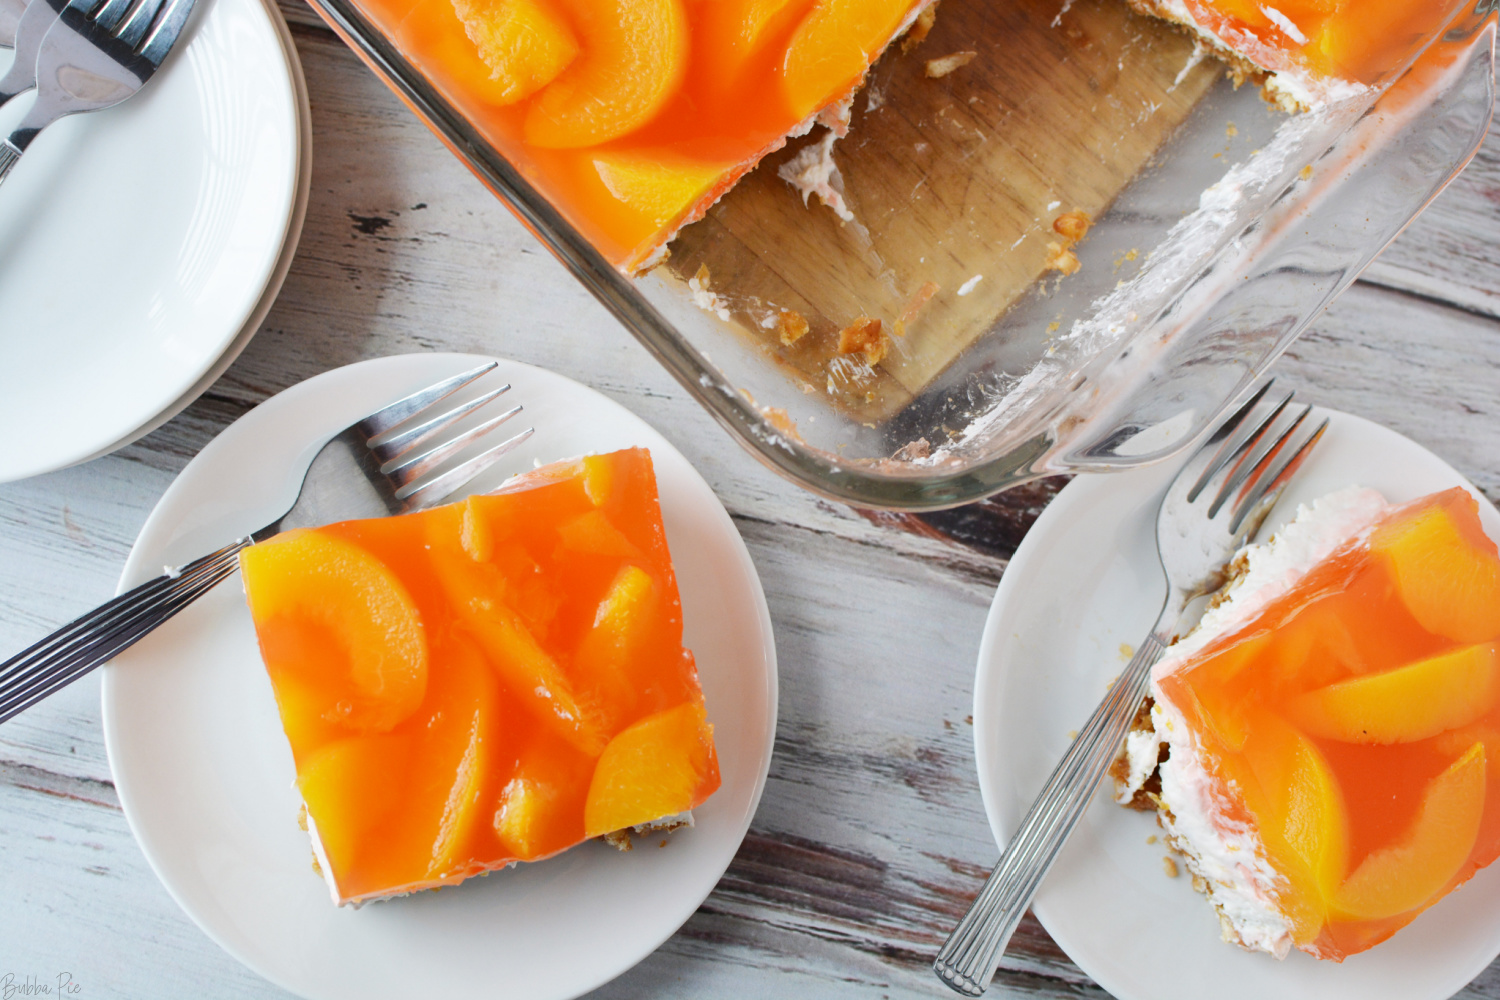 Peach Pretzel Salad Recipe is a great dessert for any occasion.